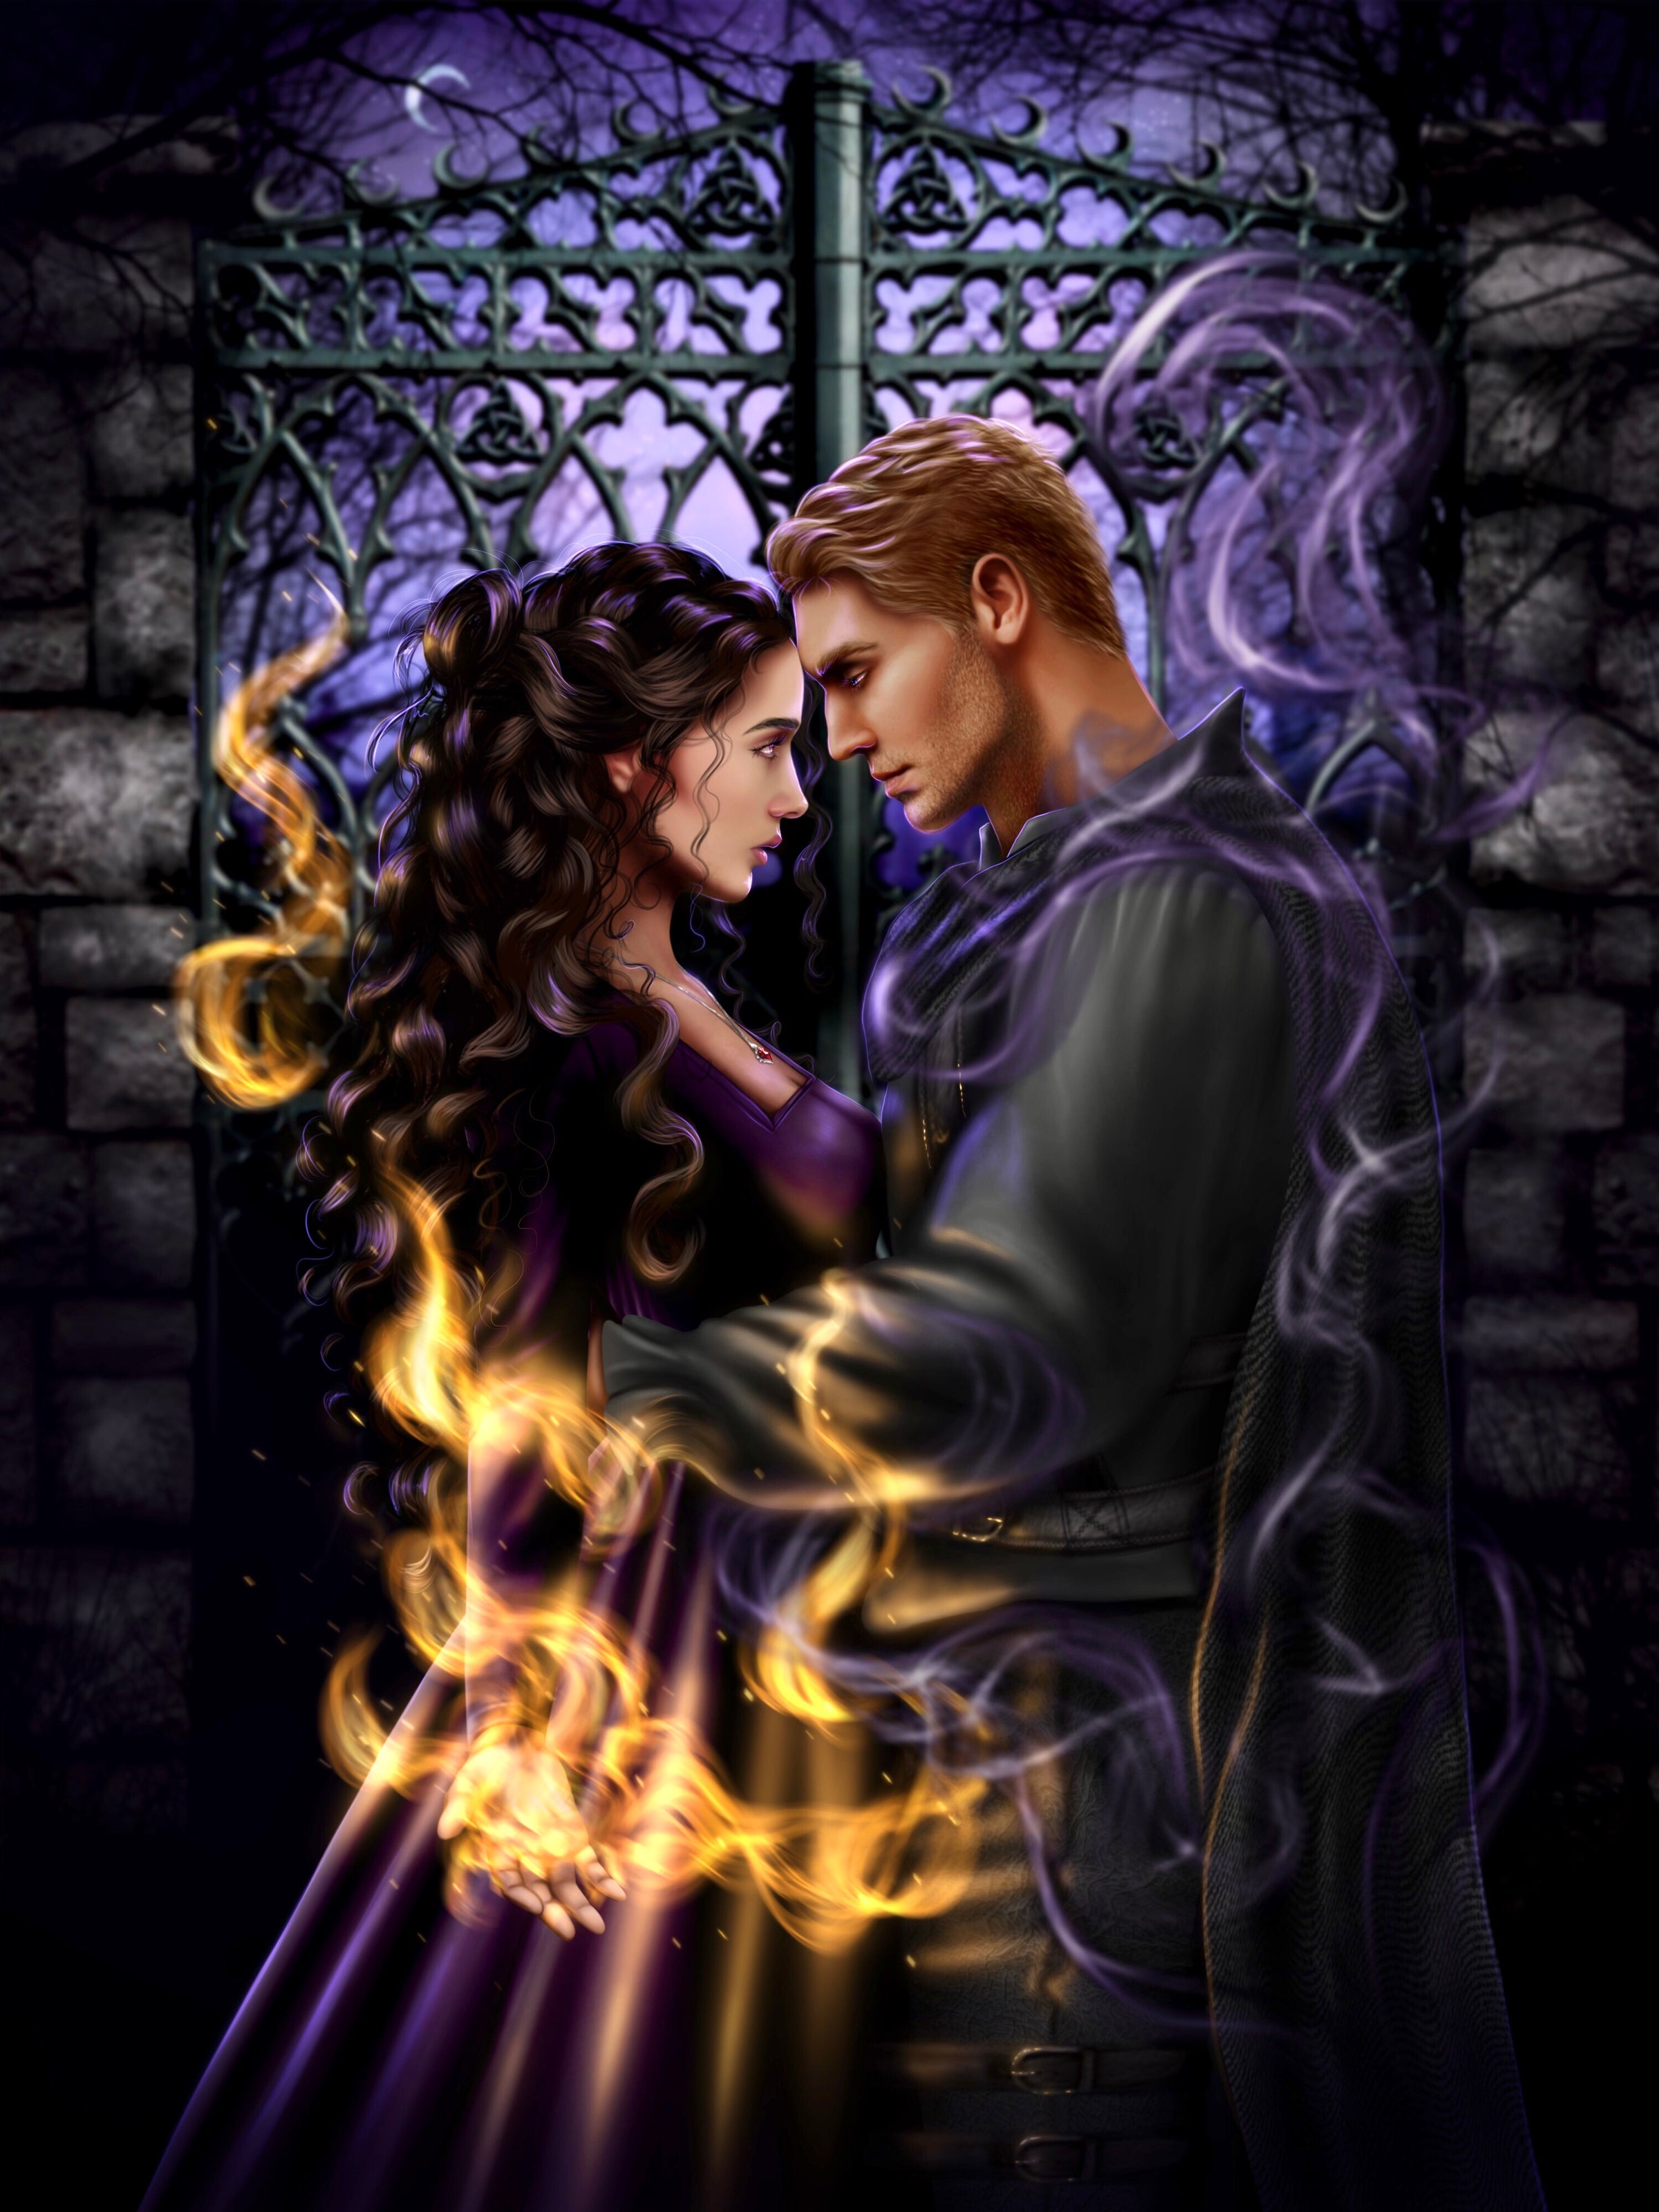 Image of man and woman holding each other in front of cemetery gates. Woman has wavy dark brown hair pulled back from her face and is wearing a purple dress, a red crystal necklace, and is controlling flames that wrap around them. The man has short blond hair and is wearing a dark jacket and cape and is controlling dark purple and black swirls of magic that is wrapping around them. Art is by @theclever.crow on Instagram, artwork is from the book Hollowed by Jessica S. Taylor.